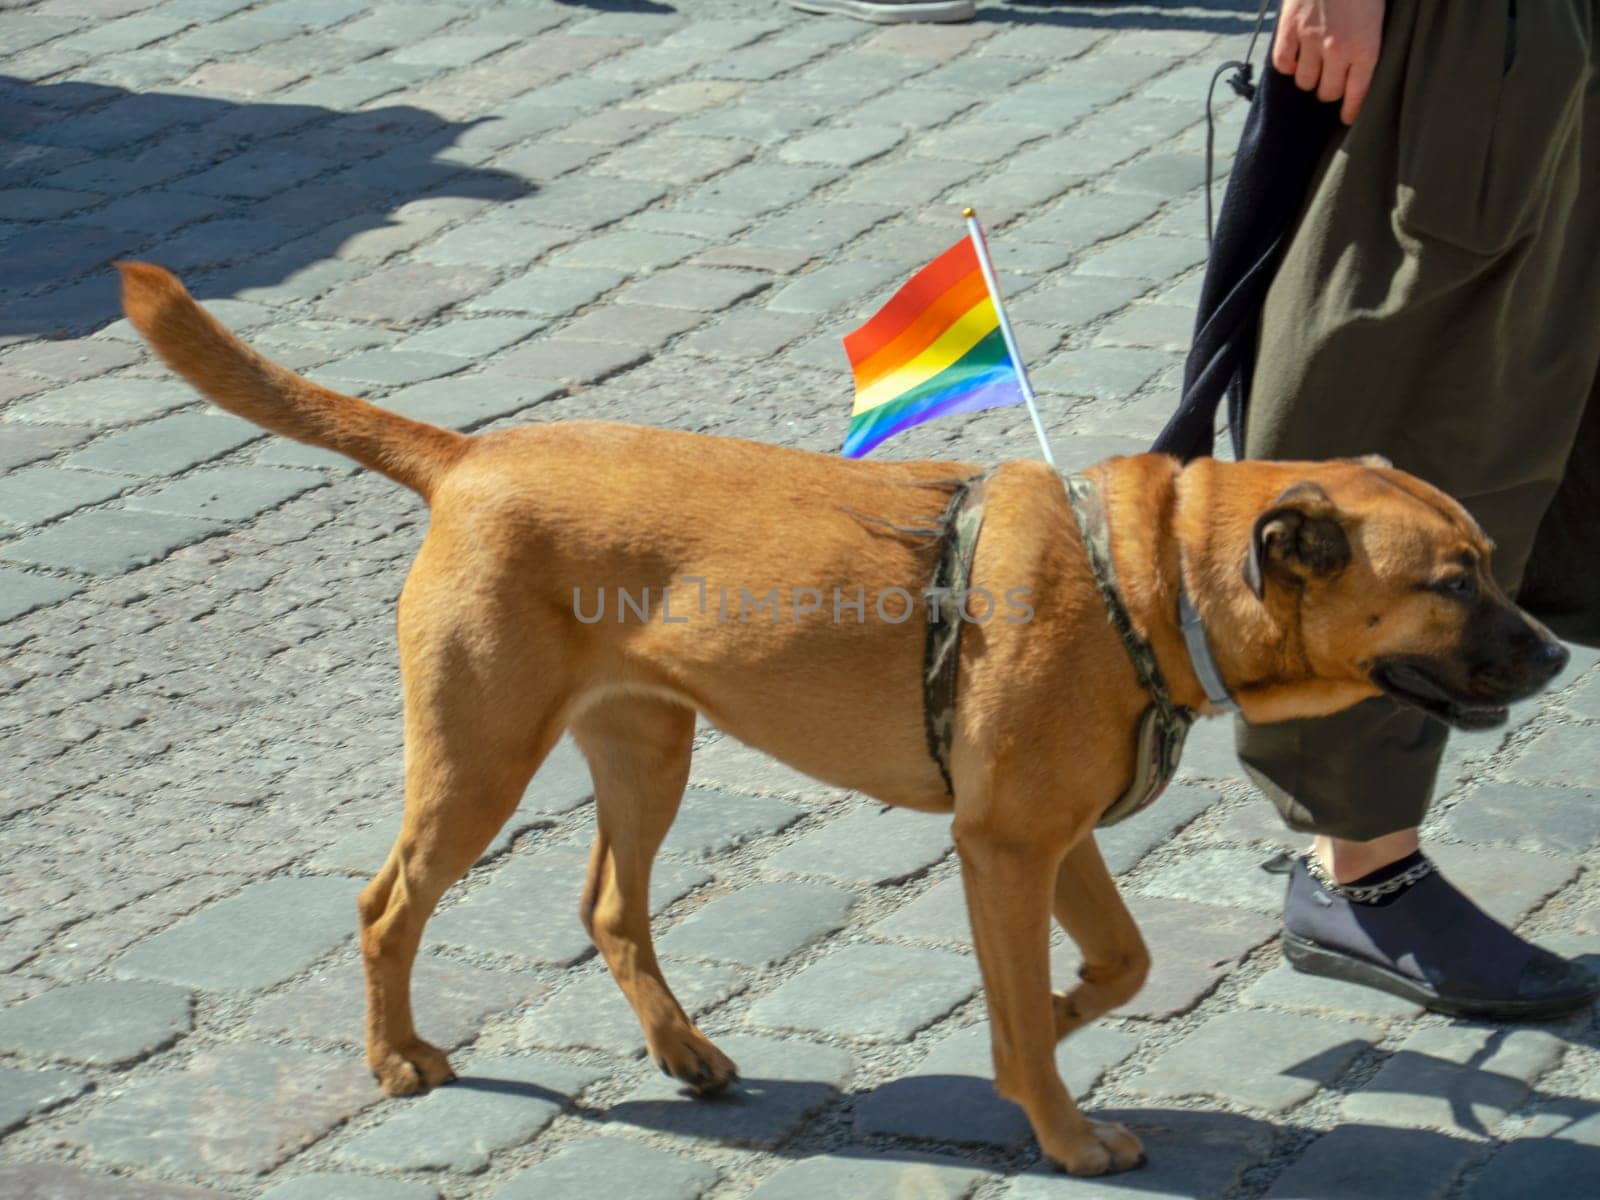 A brown dog takes part in the annual gay parade of the LGBT community with a bright scarf around his neck. by Dimidov27@mail.ru